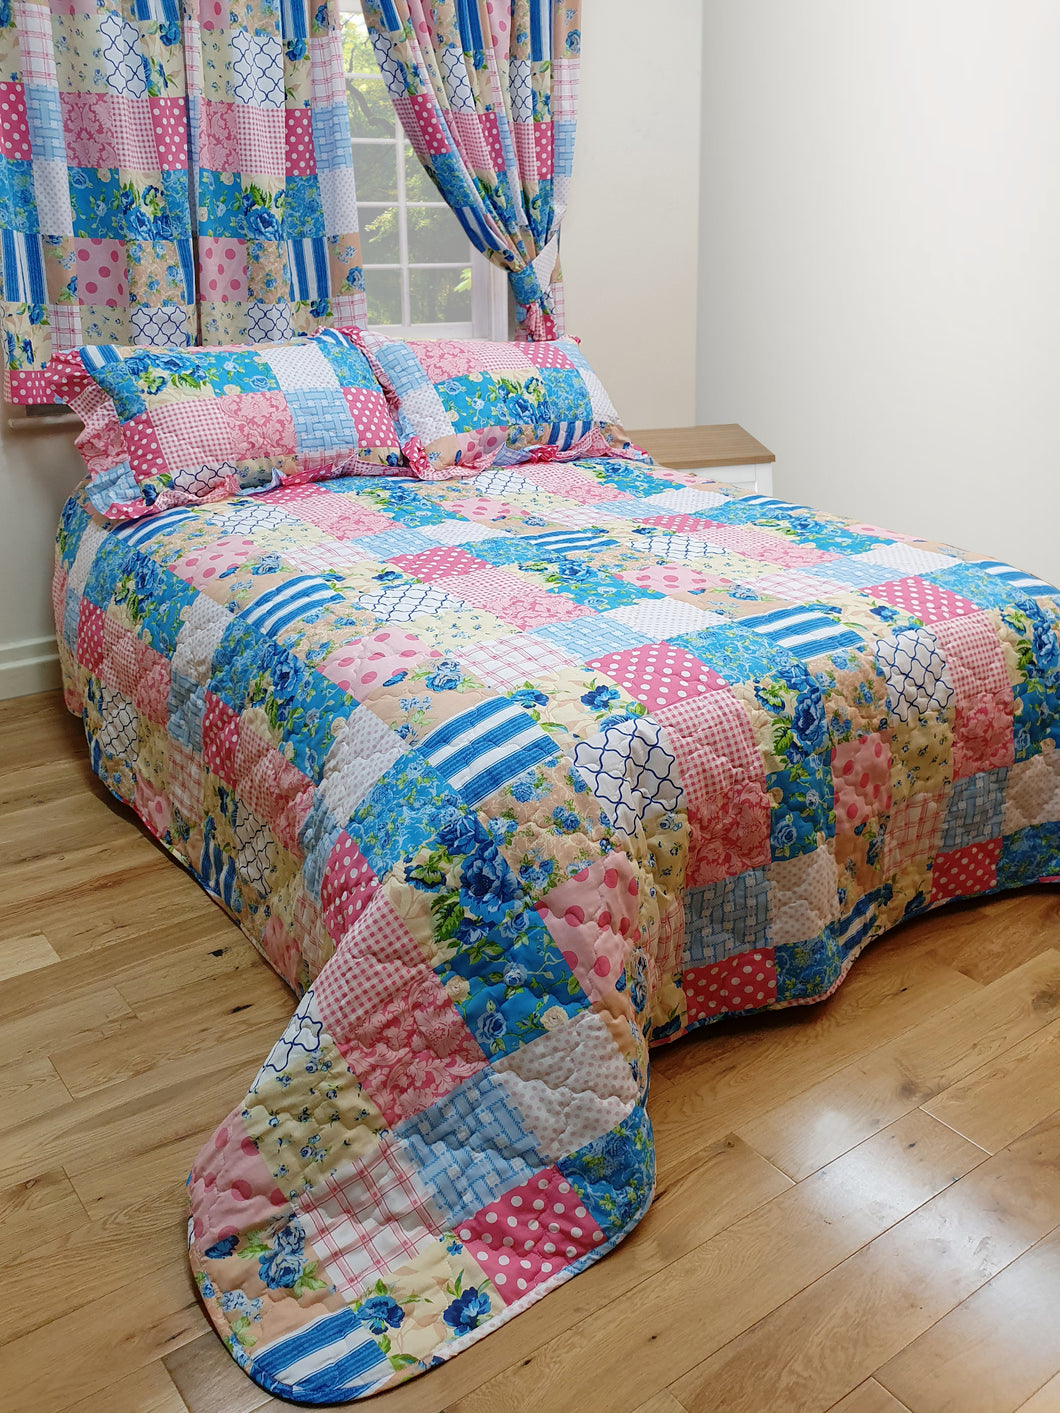 Patchwork Blue - Quilted Bedspread Throw Over Set Geometric Pink Beige White